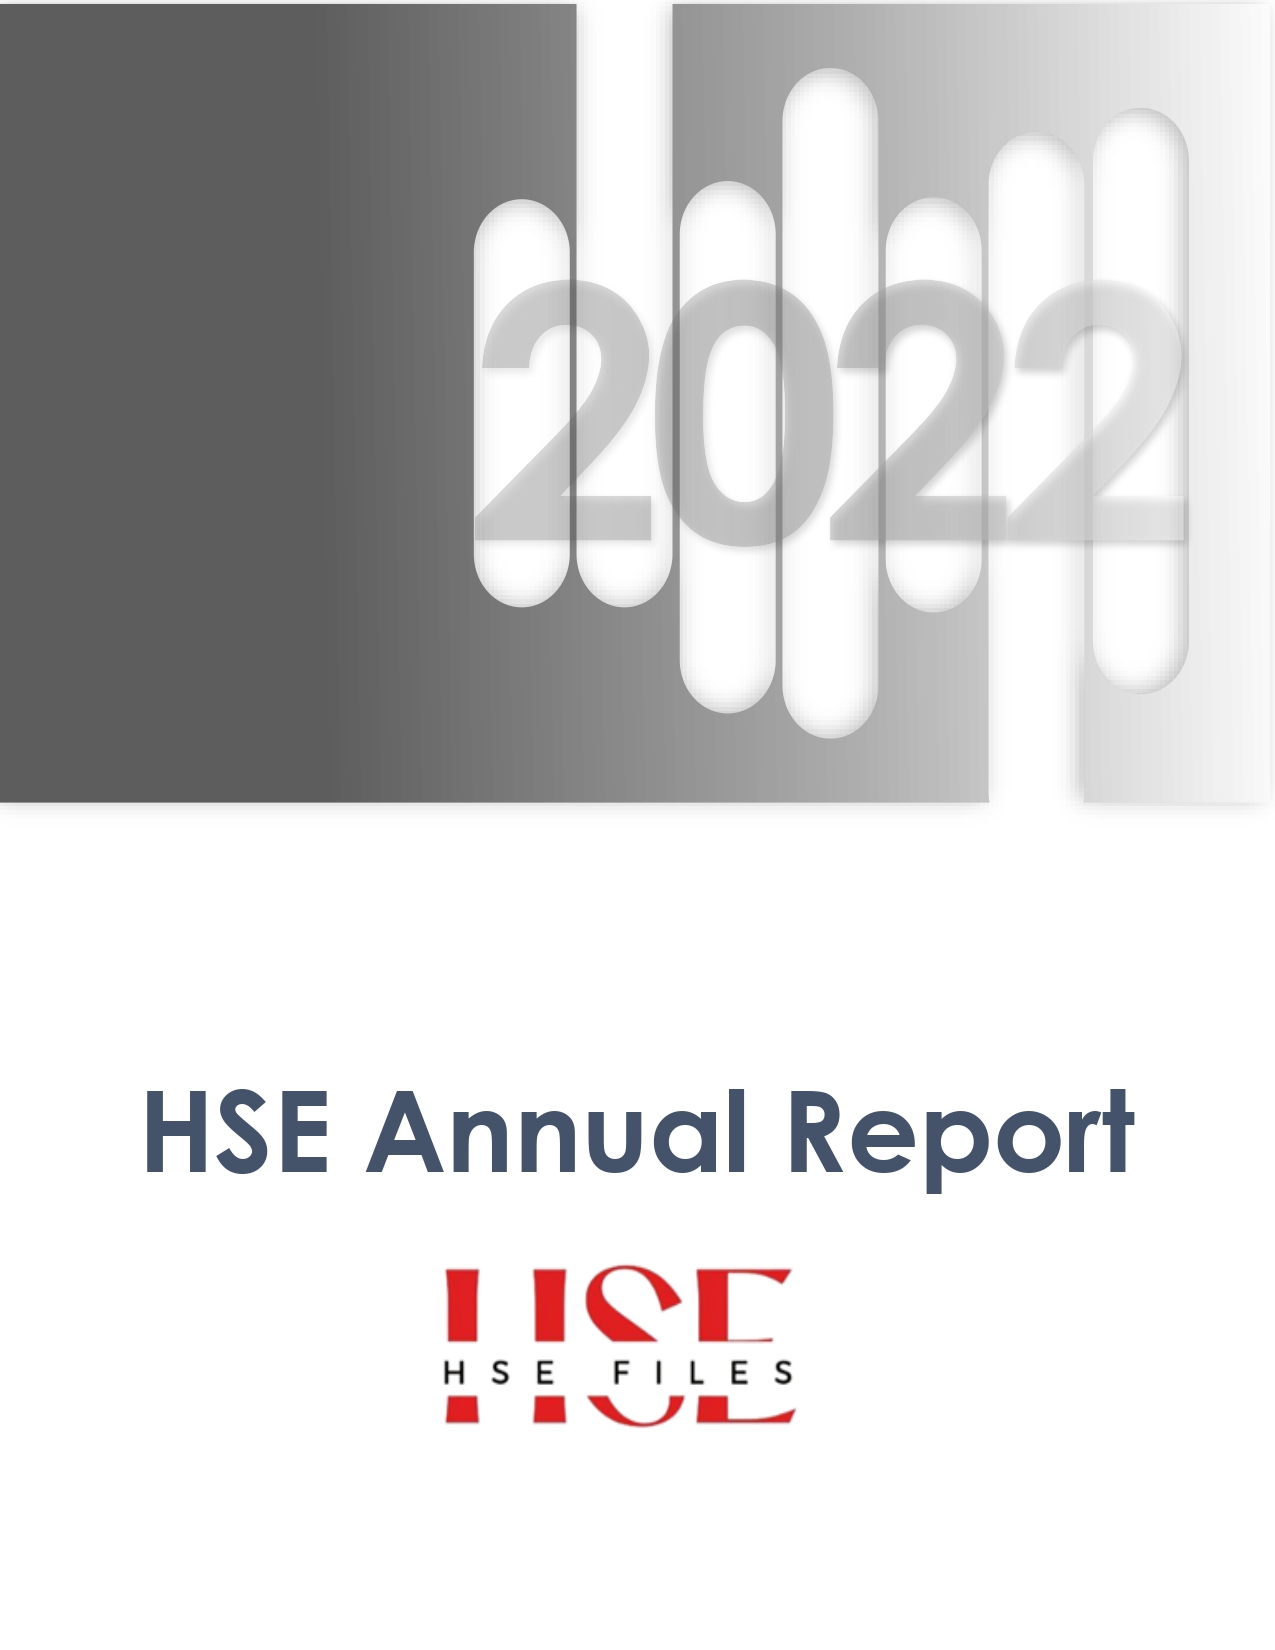 HSE Annual Report Template